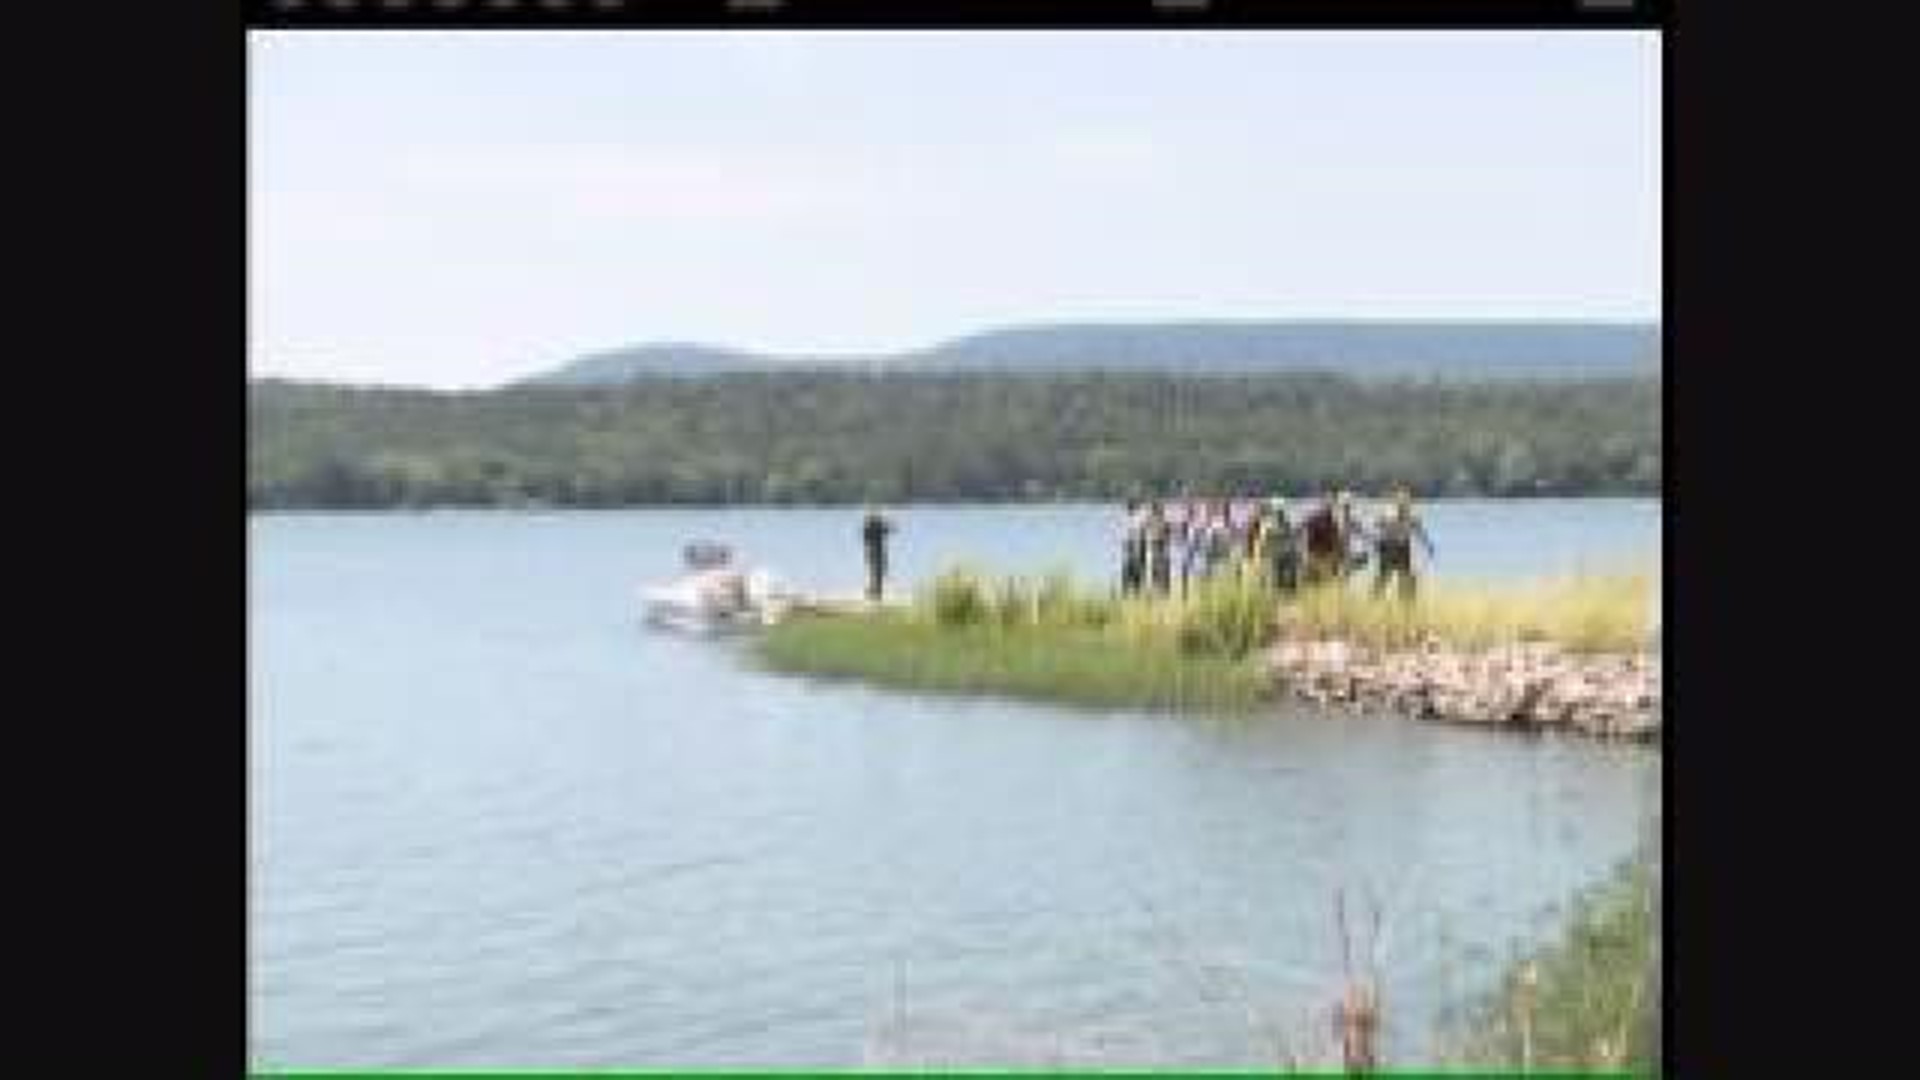 Body Recovered from Sugar Loaf Lake